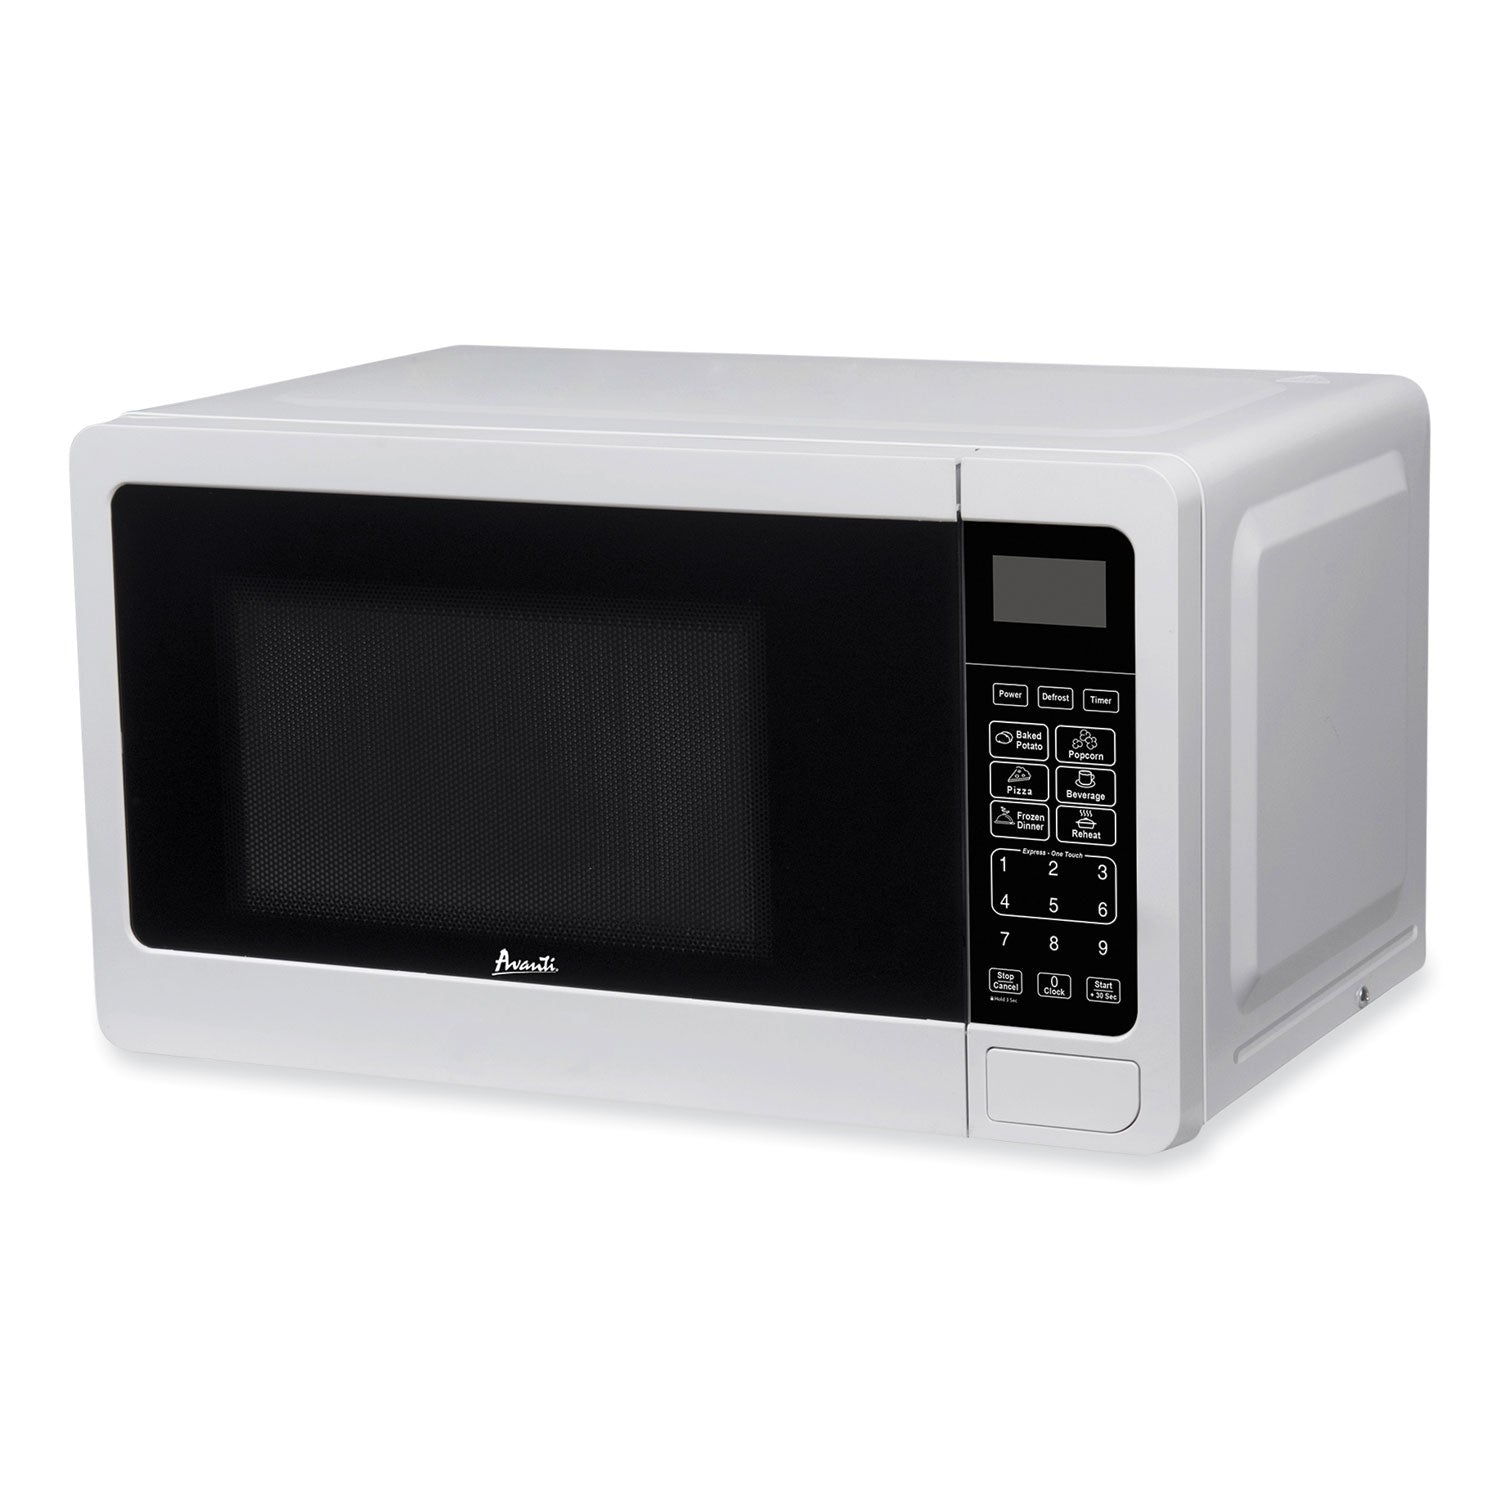 07-cu-ft-microwave-oven-700-watts-white_avamt7v0w - 1